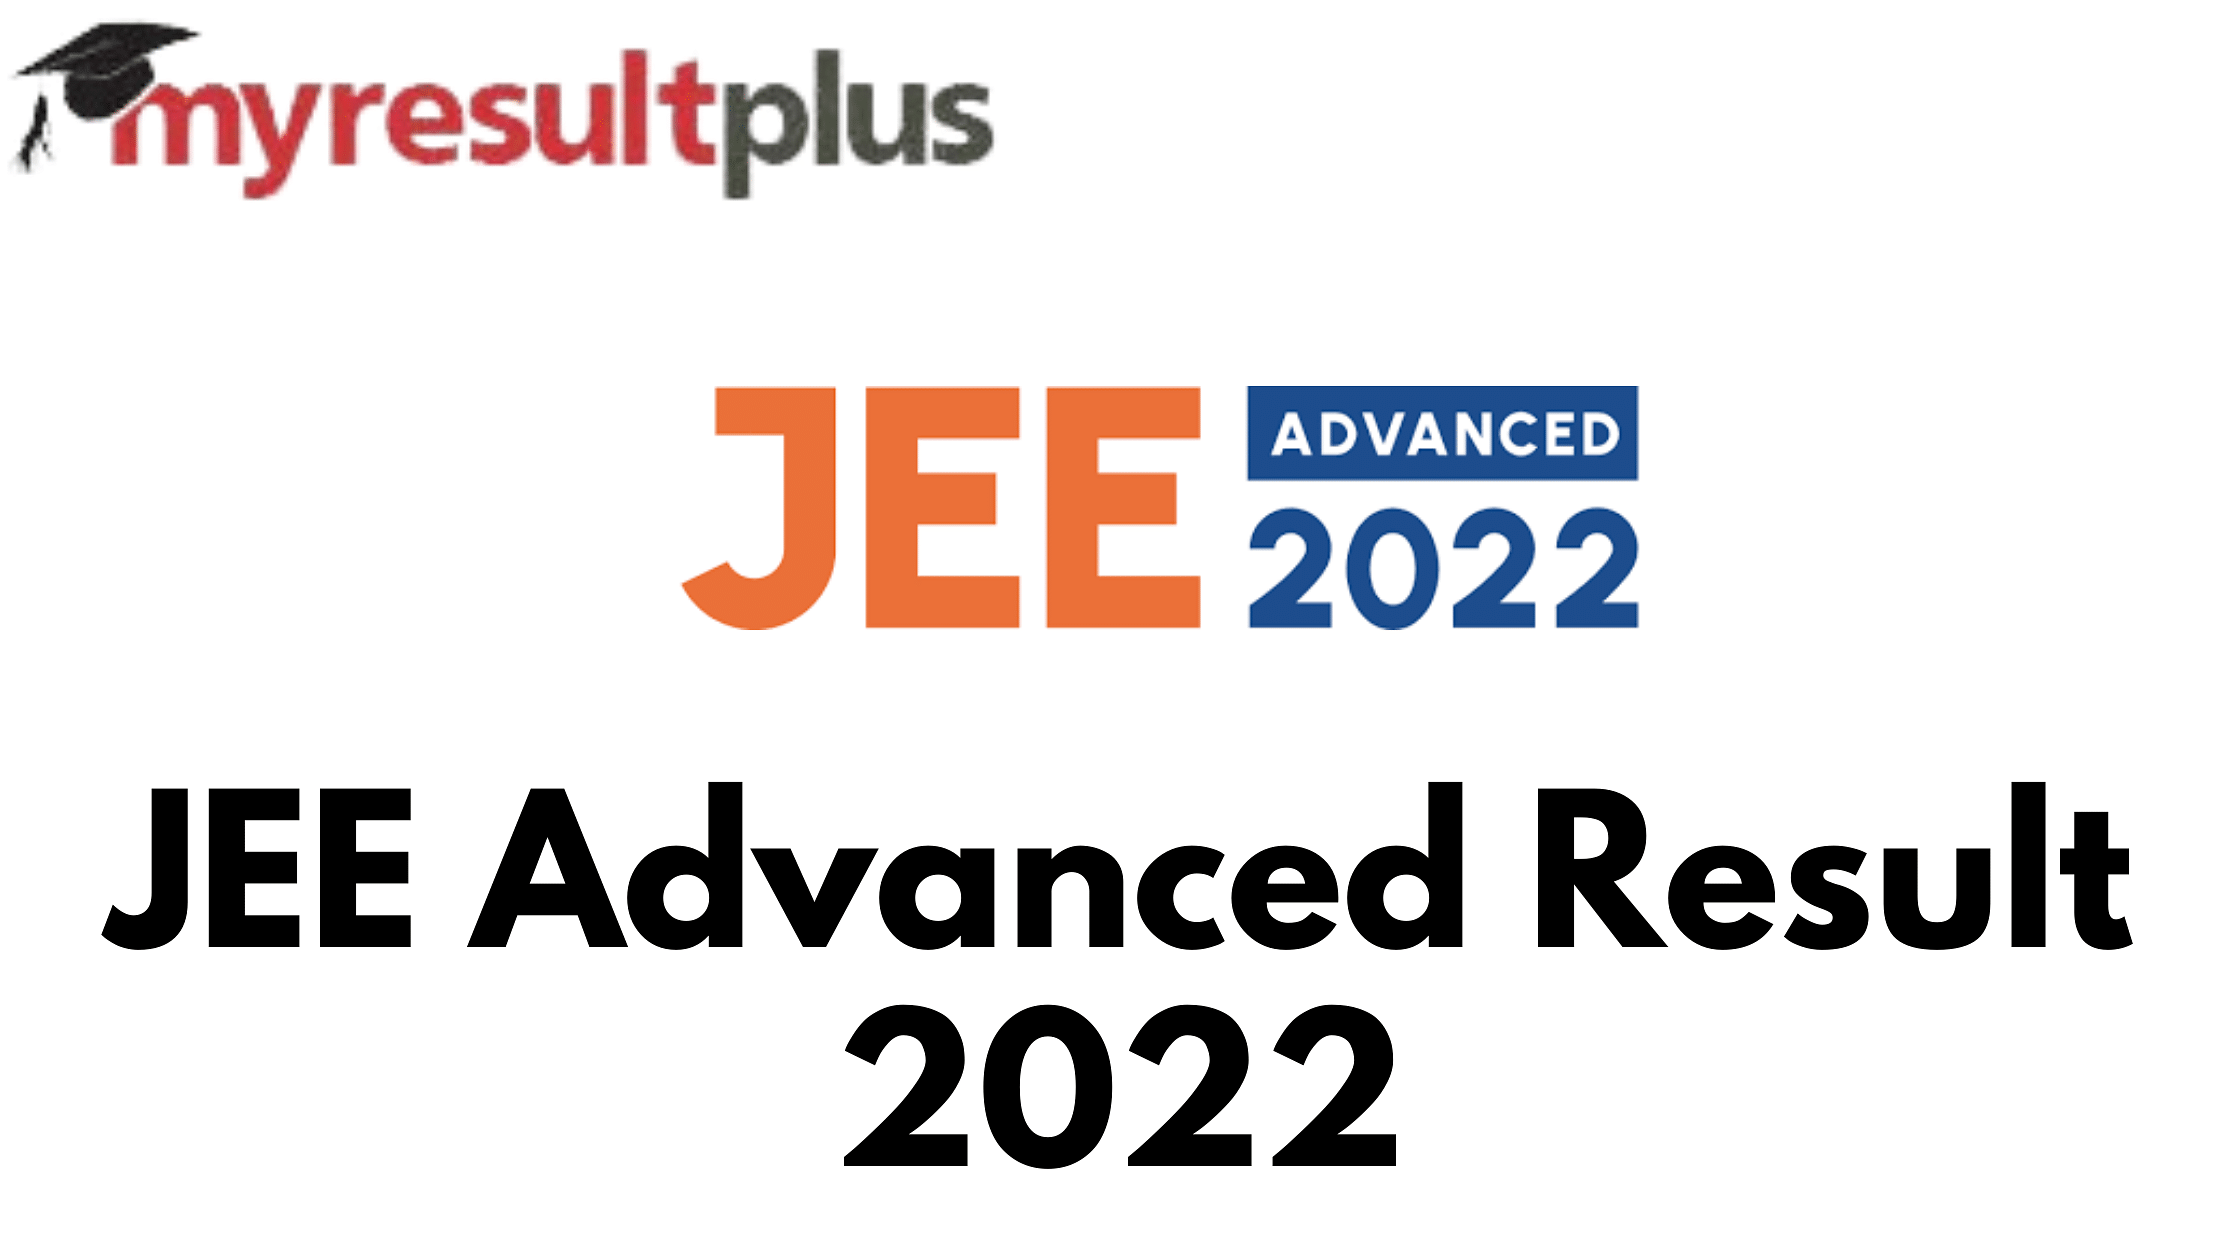 JEE Advanced 2022 Result Expected Soon, Know How to Check Here